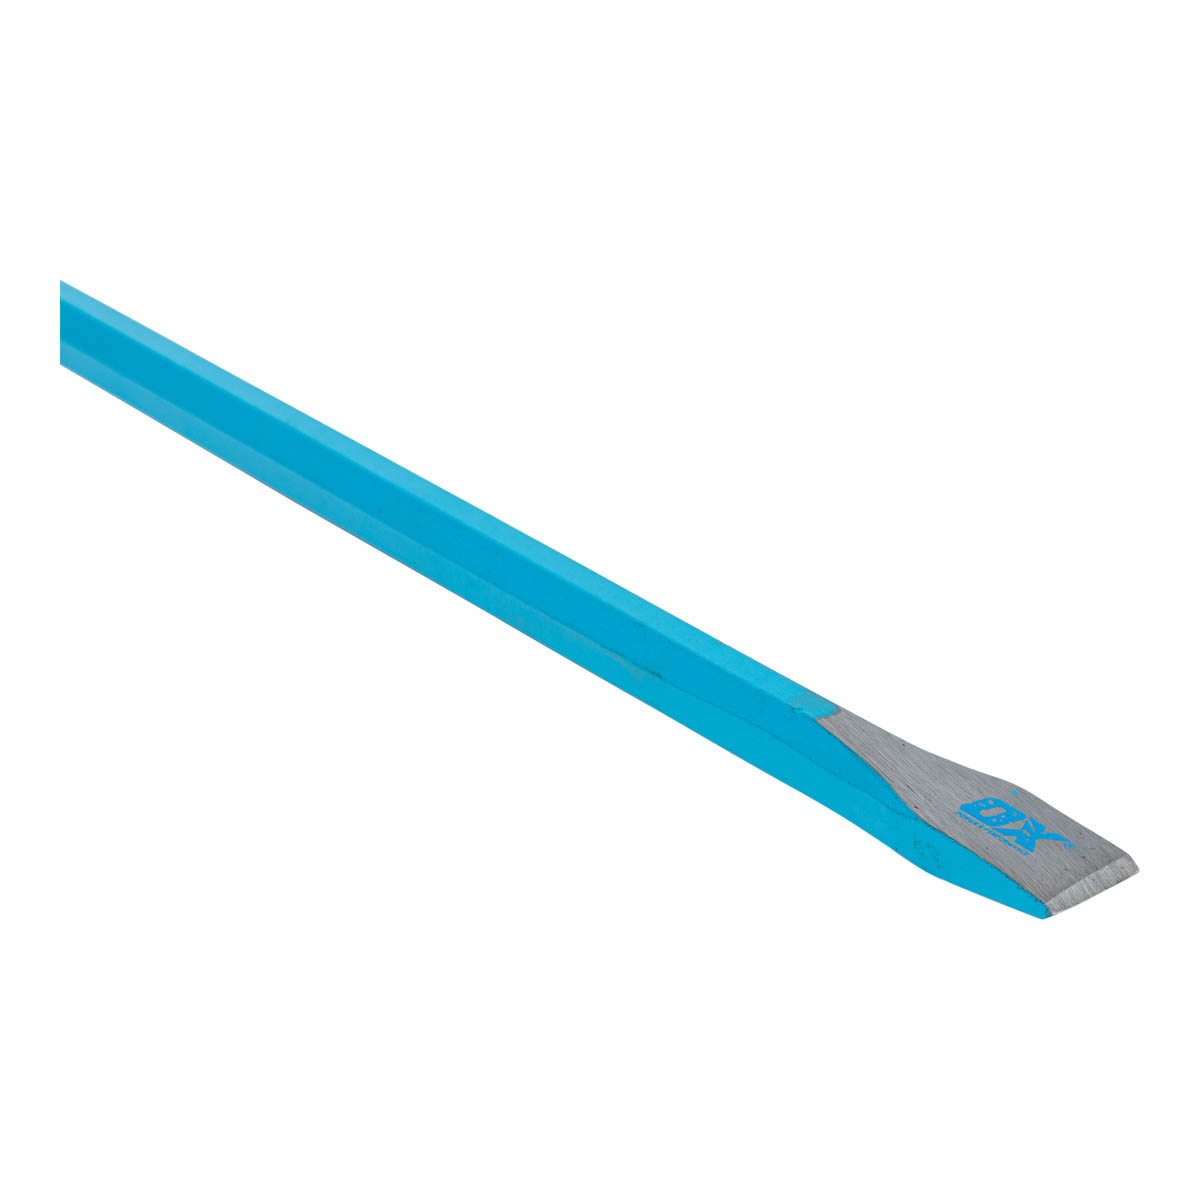 OX Trade Cold Chisel - ¾ X 8 / 20mm x 200mm